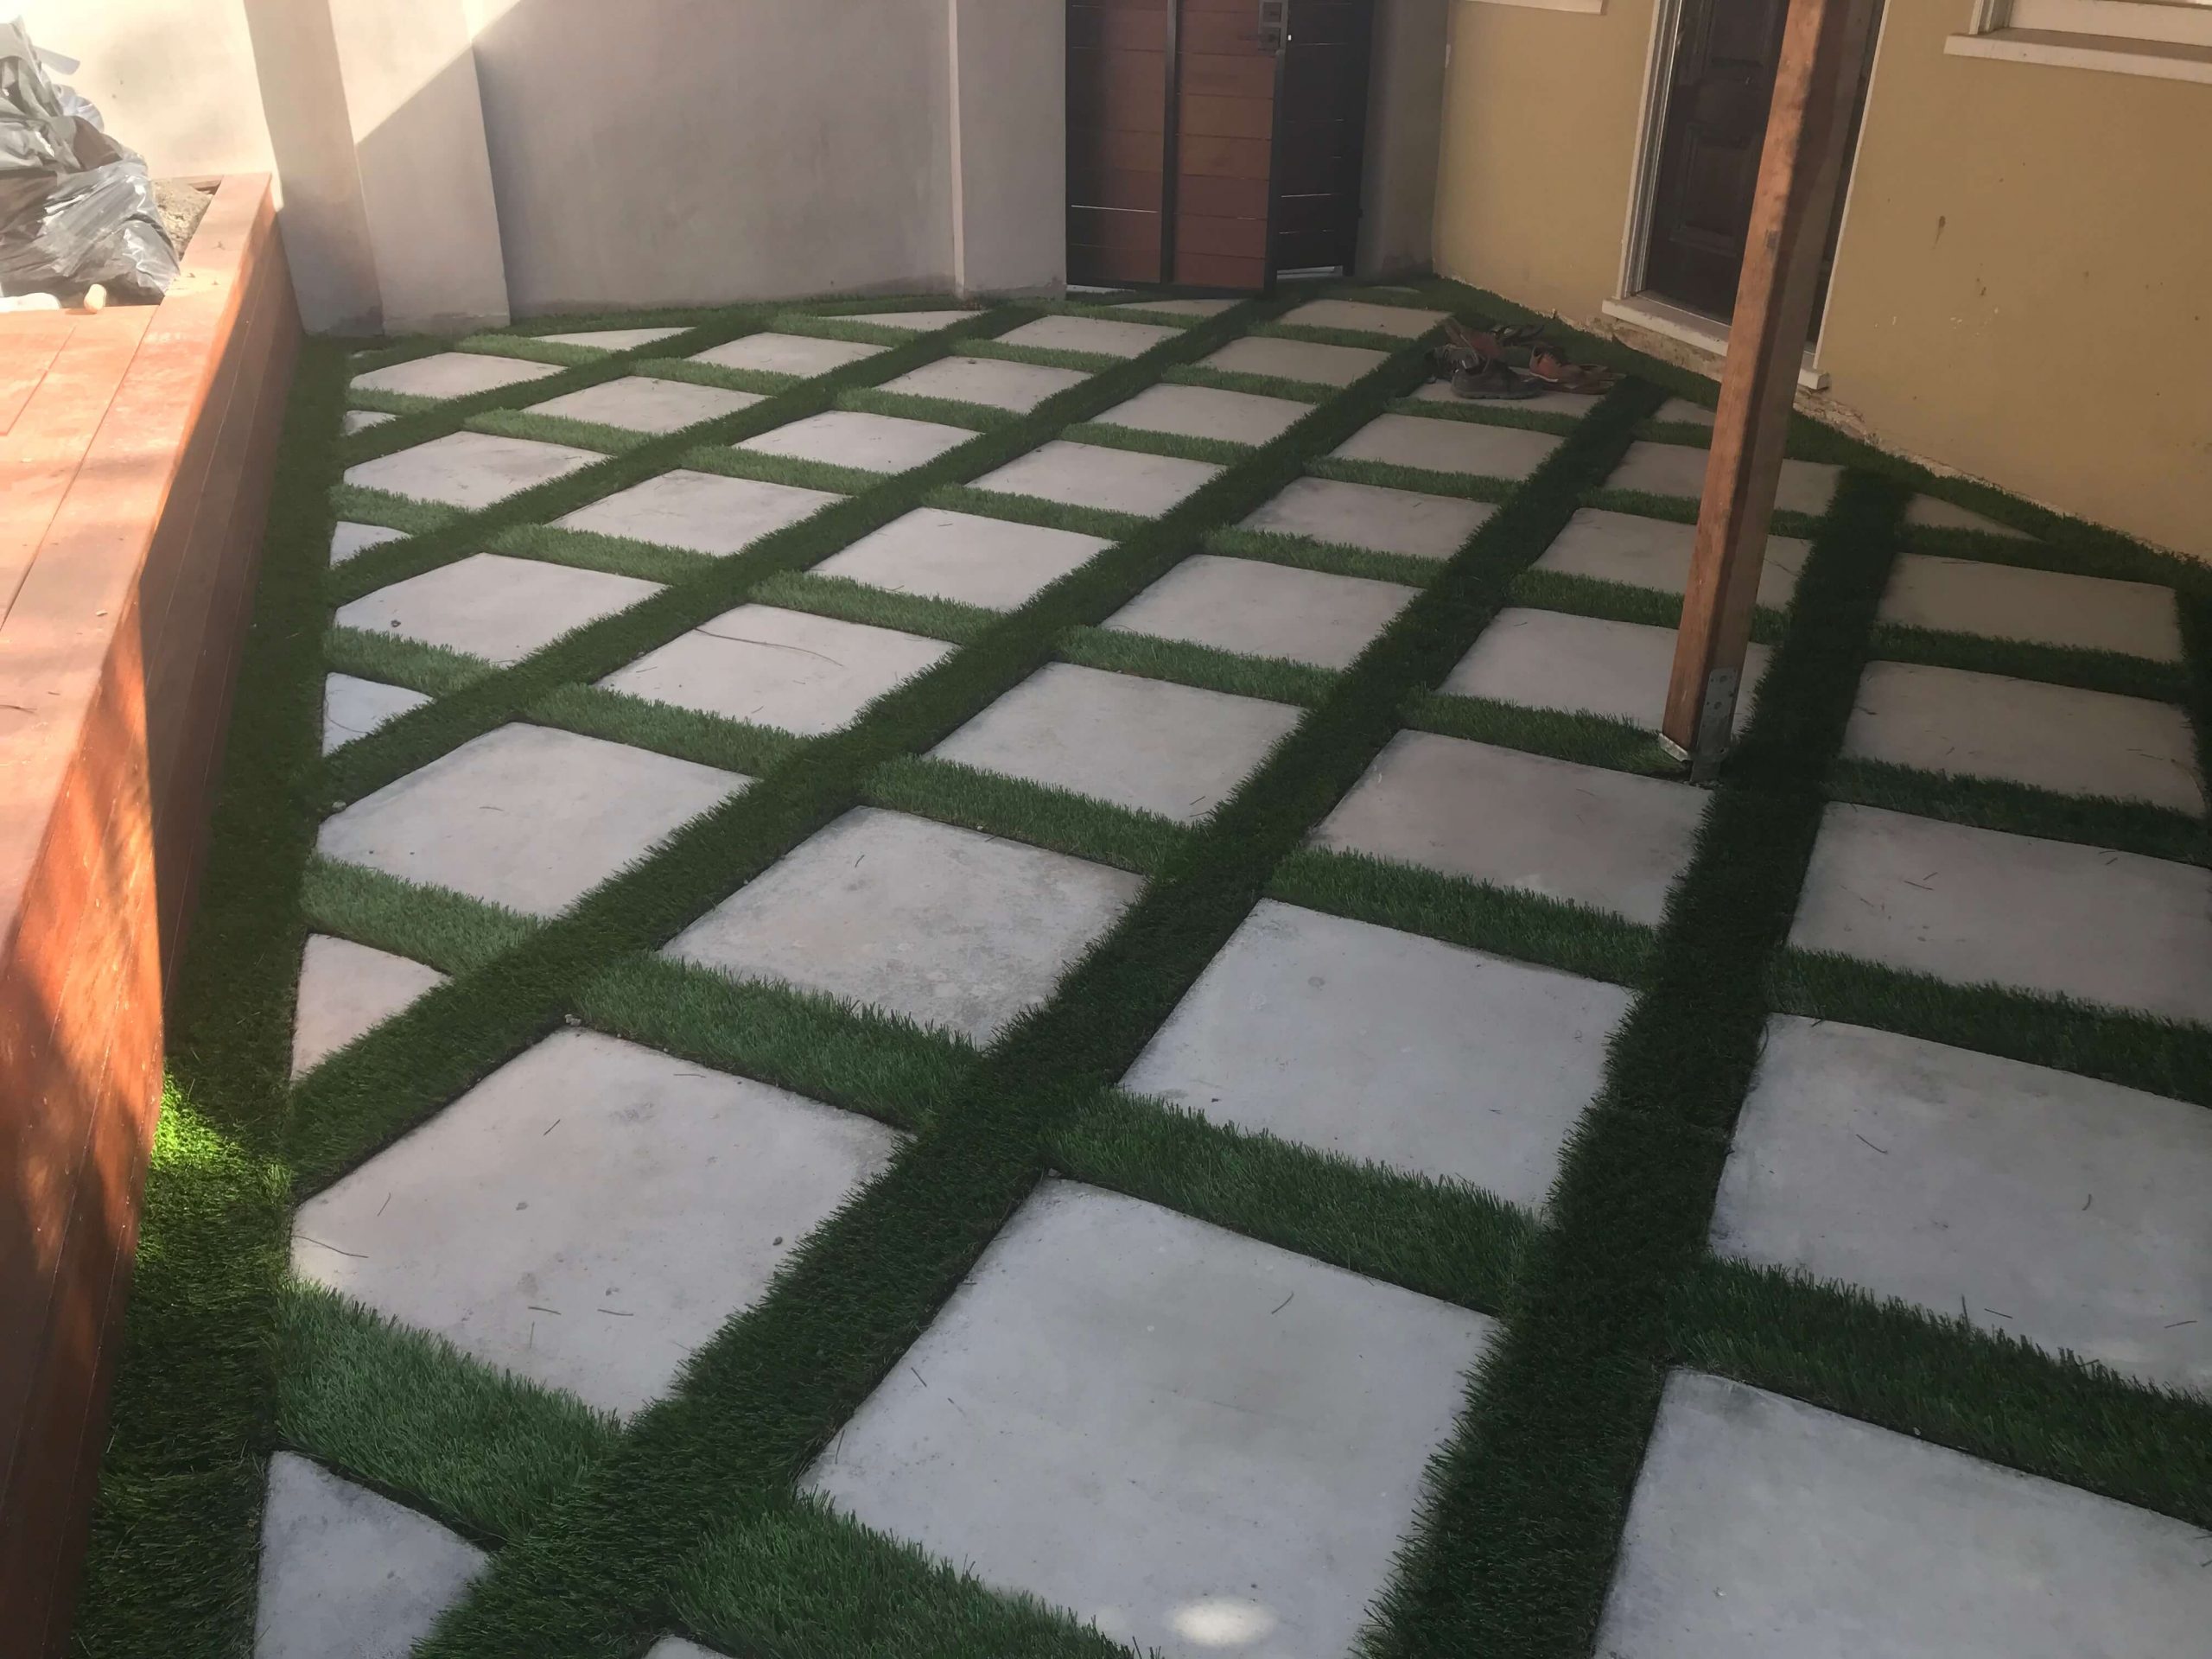 Concrete and Grass Grid Flooring